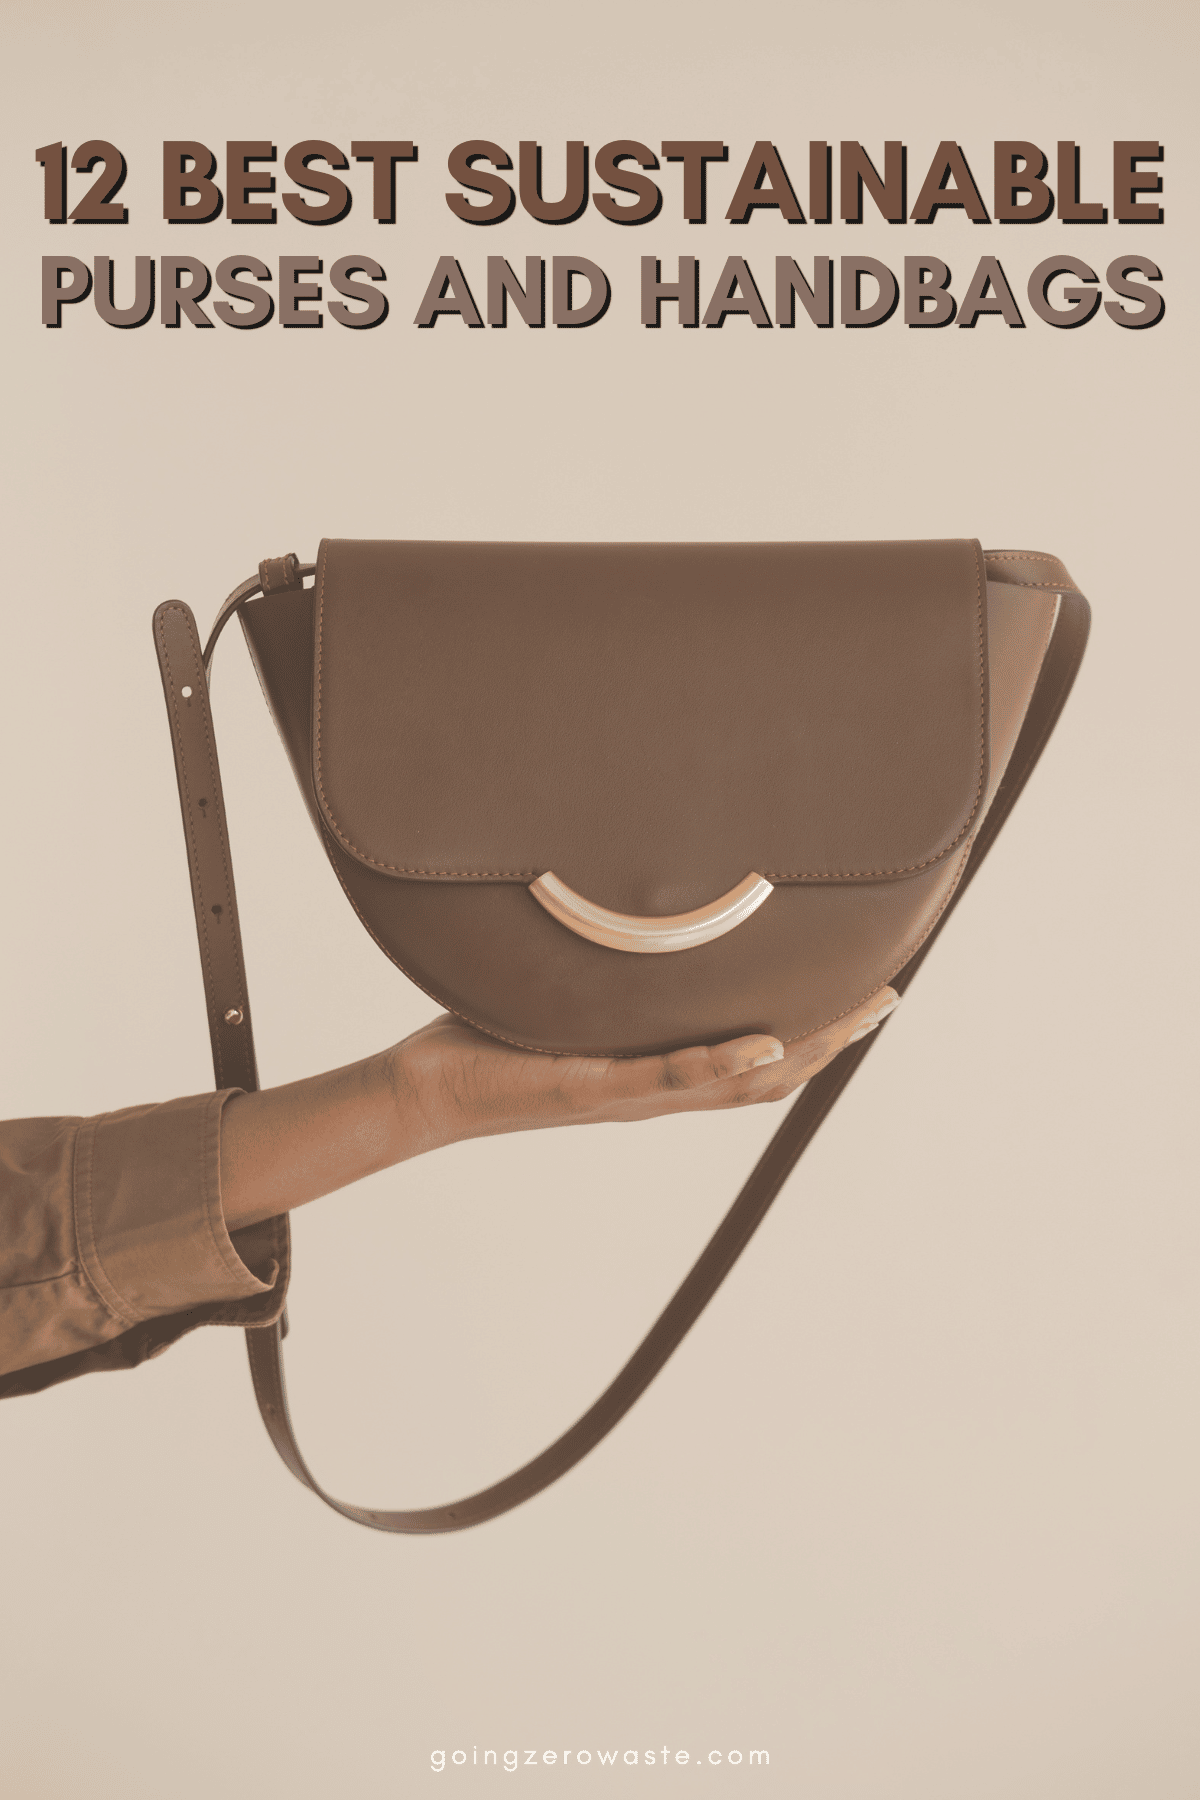 12 Purses & Handbags that are Chic, Stylish, and Planet Friendly - Going  Zero Waste